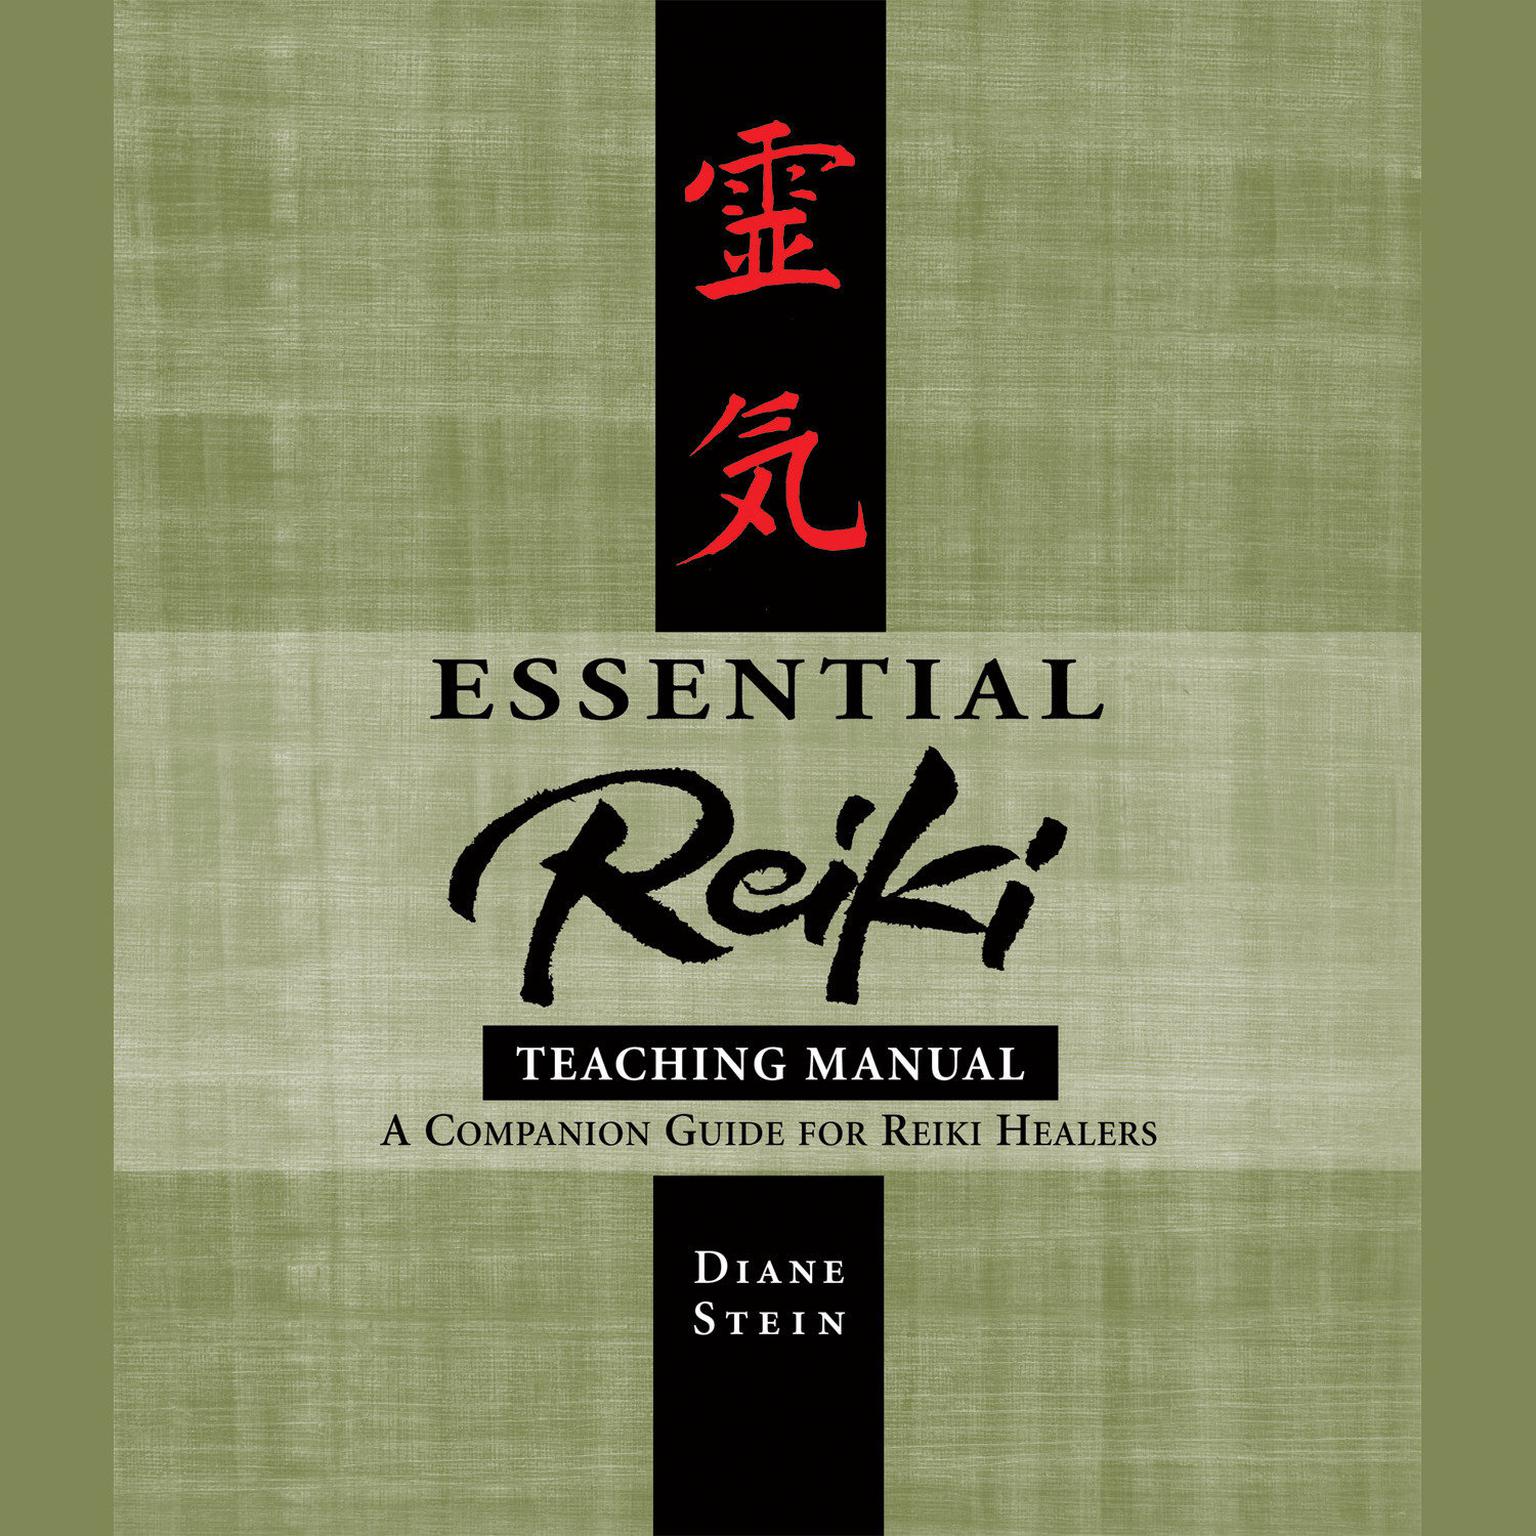 Essential Reiki Teaching Manual: A Companion Guide for Reiki Healers Audiobook, by Diane Stein